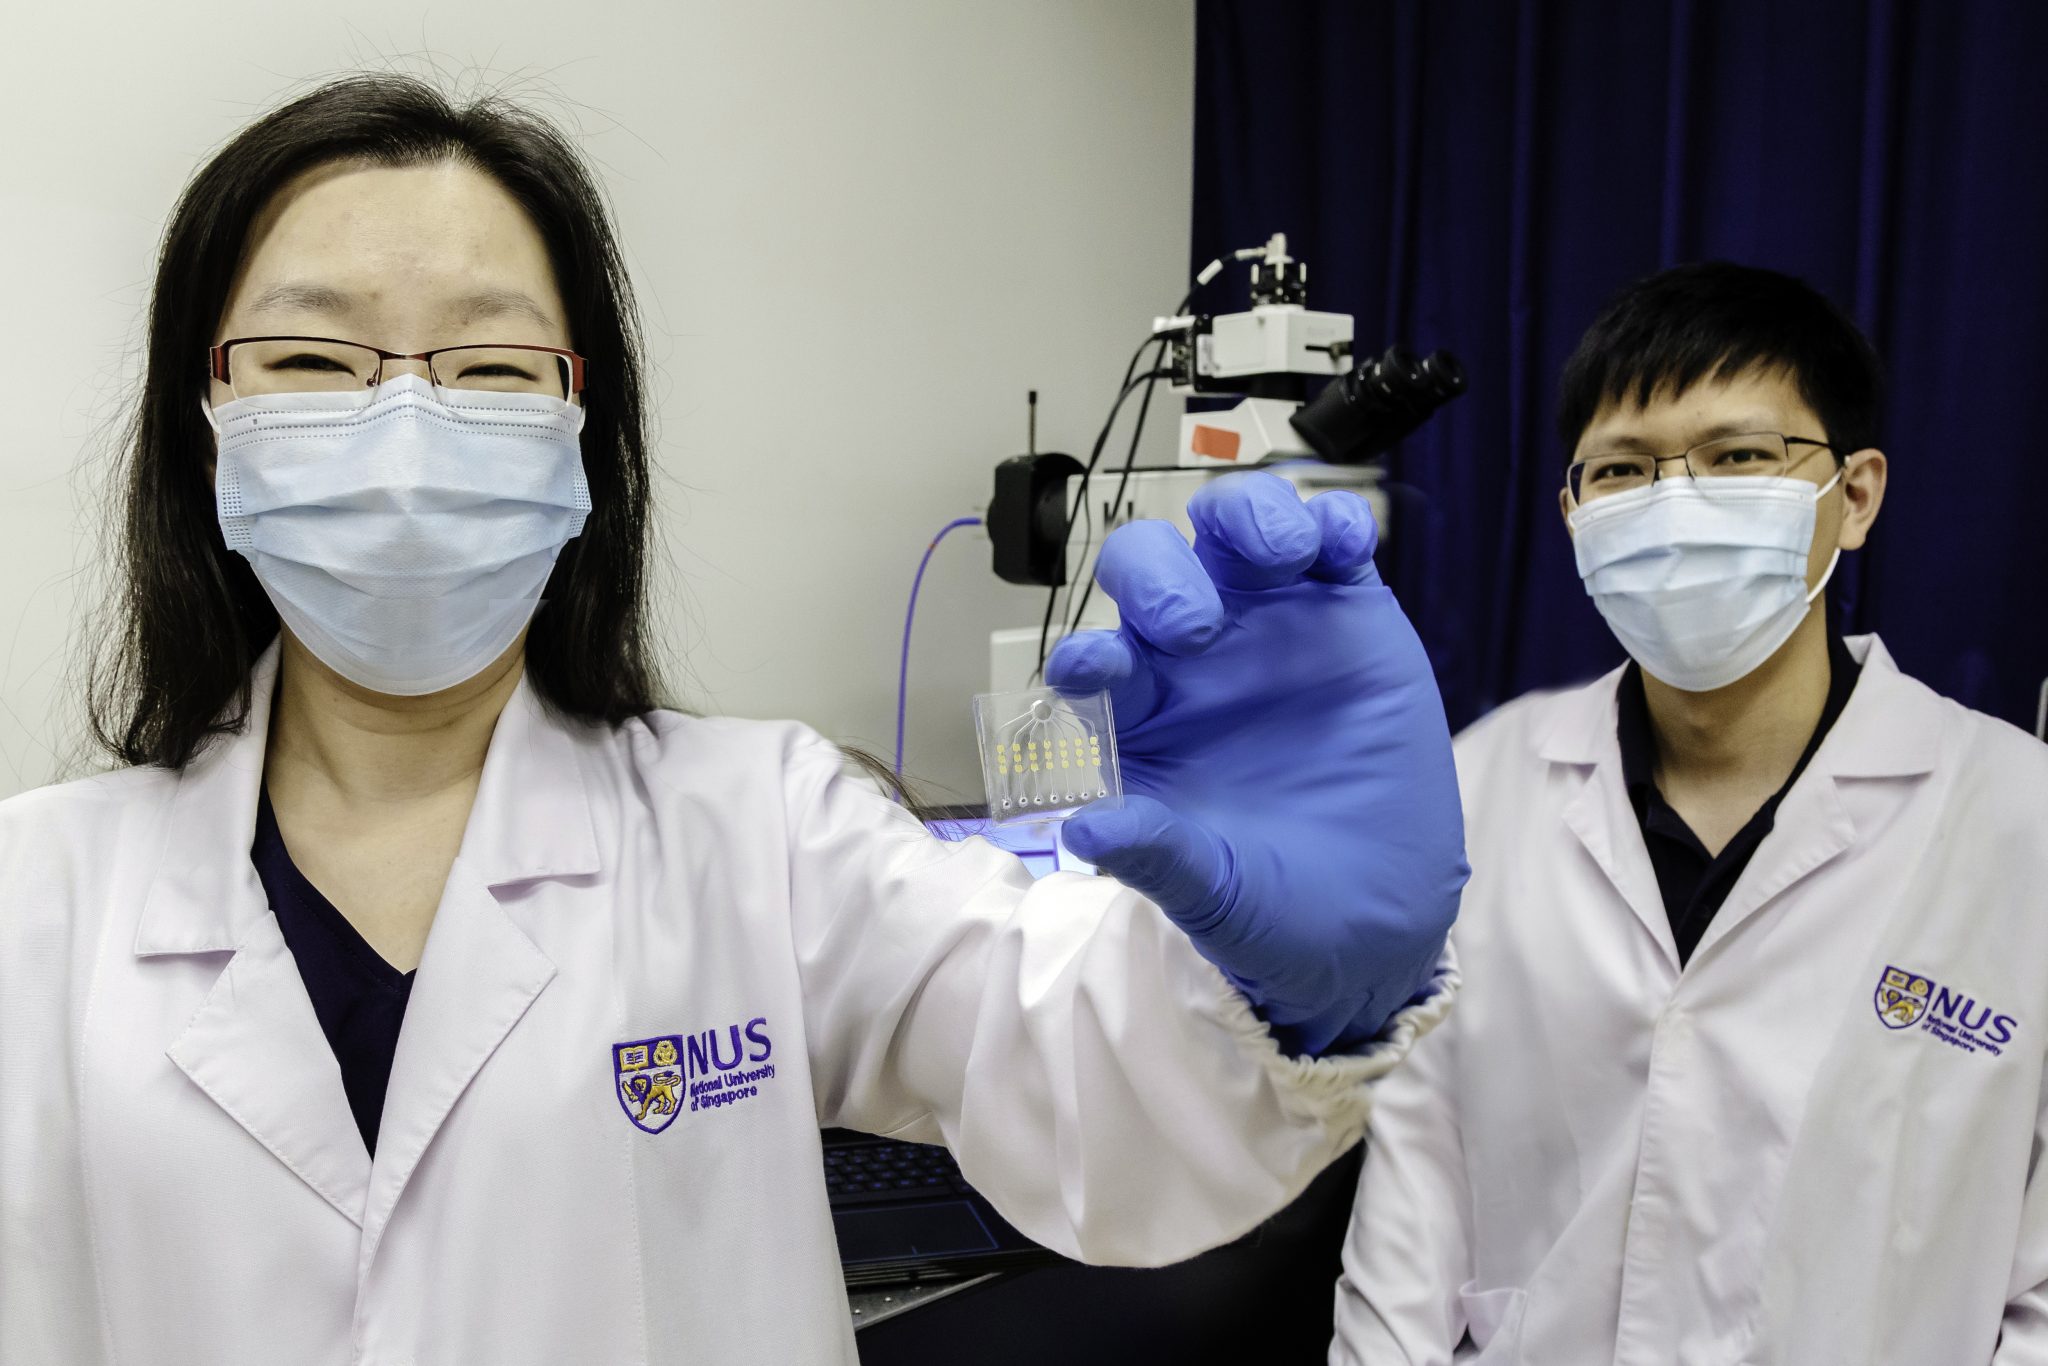 Assistant Professor Shao Huilin (left) and Dr Sijun Pan (right) and their team from NUS Biomedical Engineering and Institute for Health Innovation & Technology developed ExoSCOPE